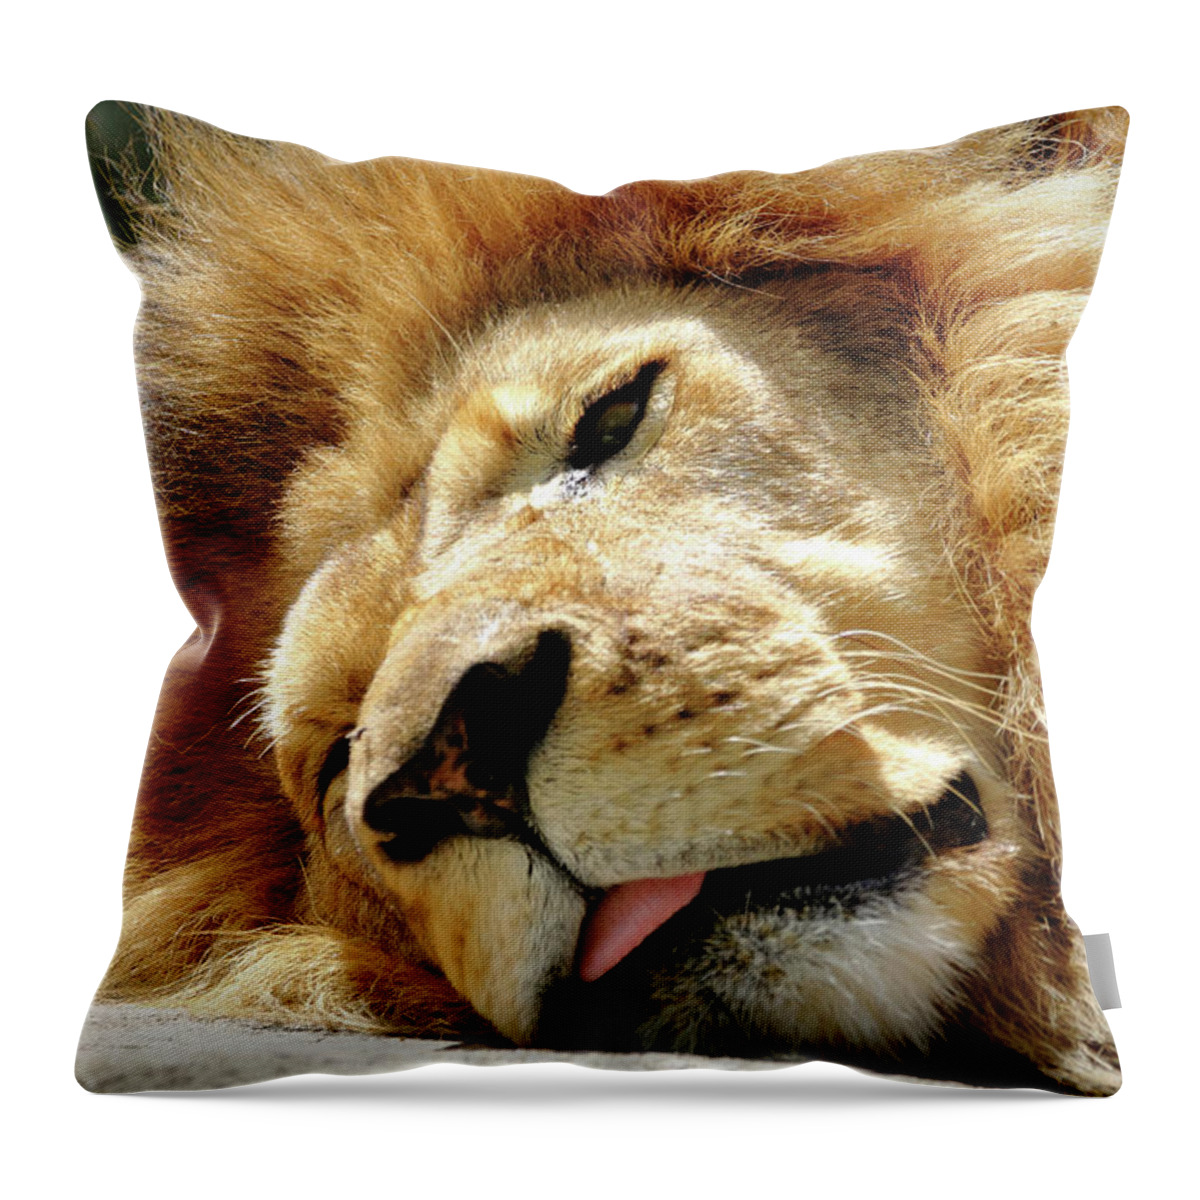 Lion Throw Pillow featuring the photograph Just Lion Around by Lens Art Photography By Larry Trager